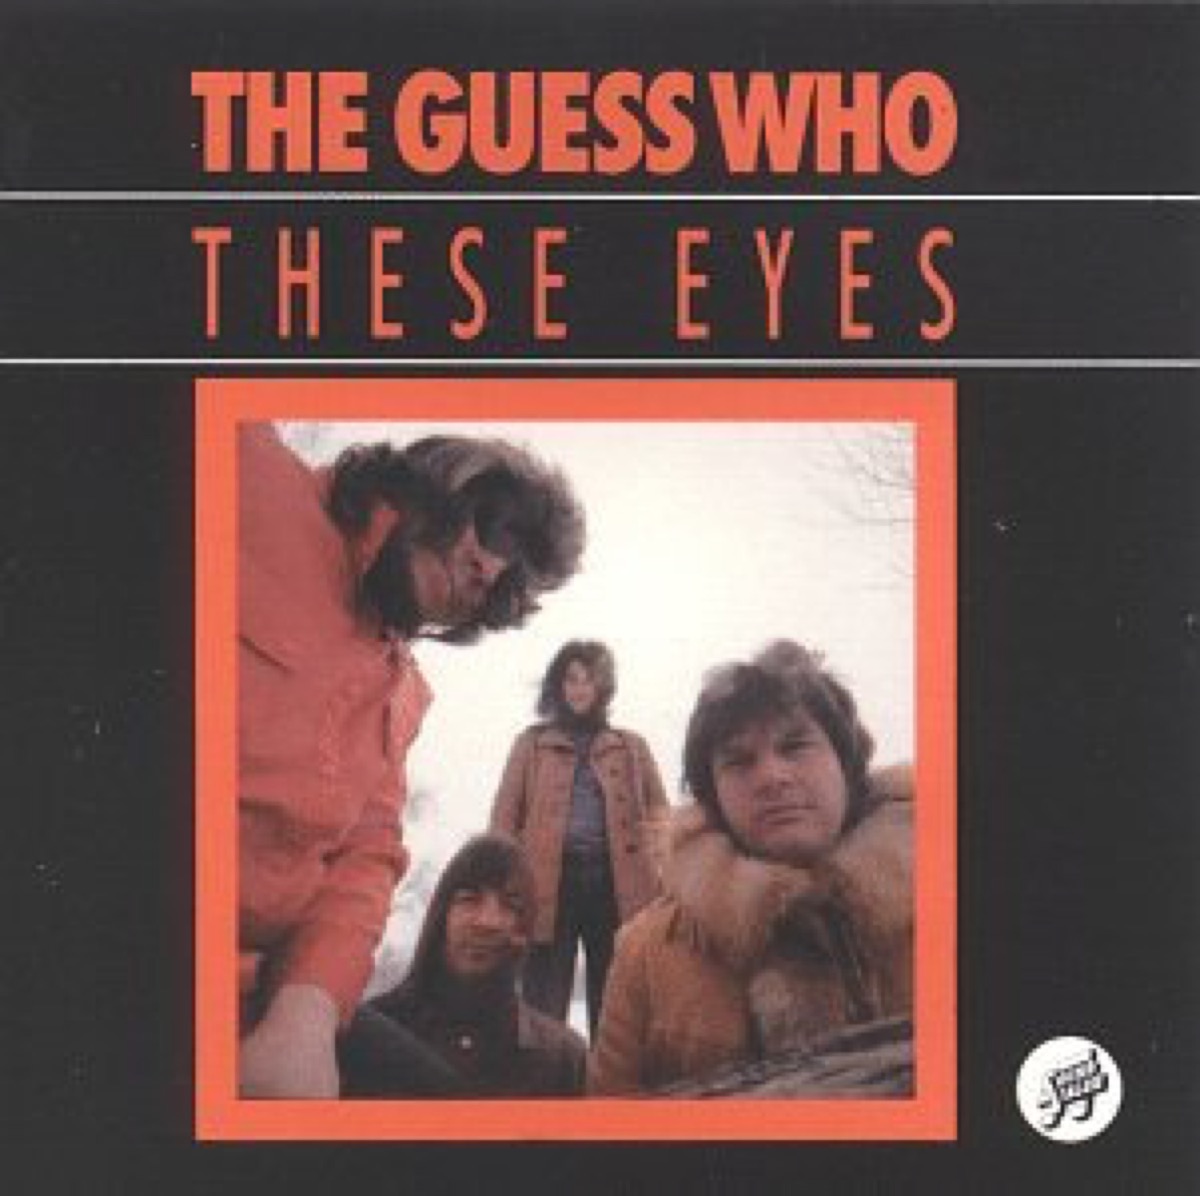 these eyes single cover for the guess who